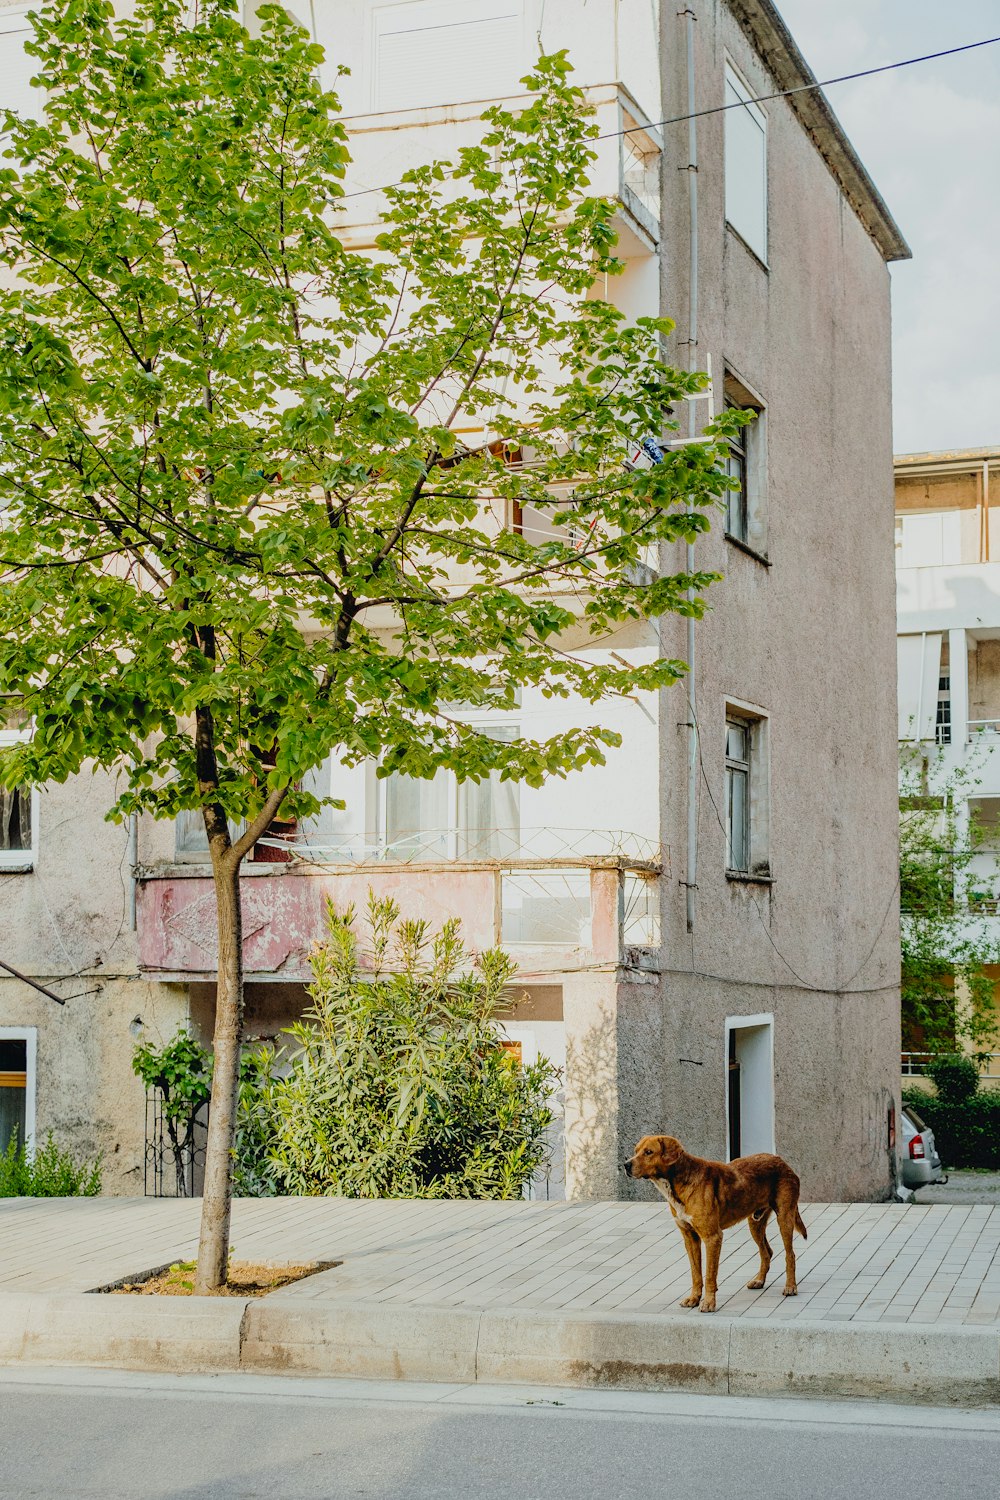 a dog standing on a sidewalk next to a tree